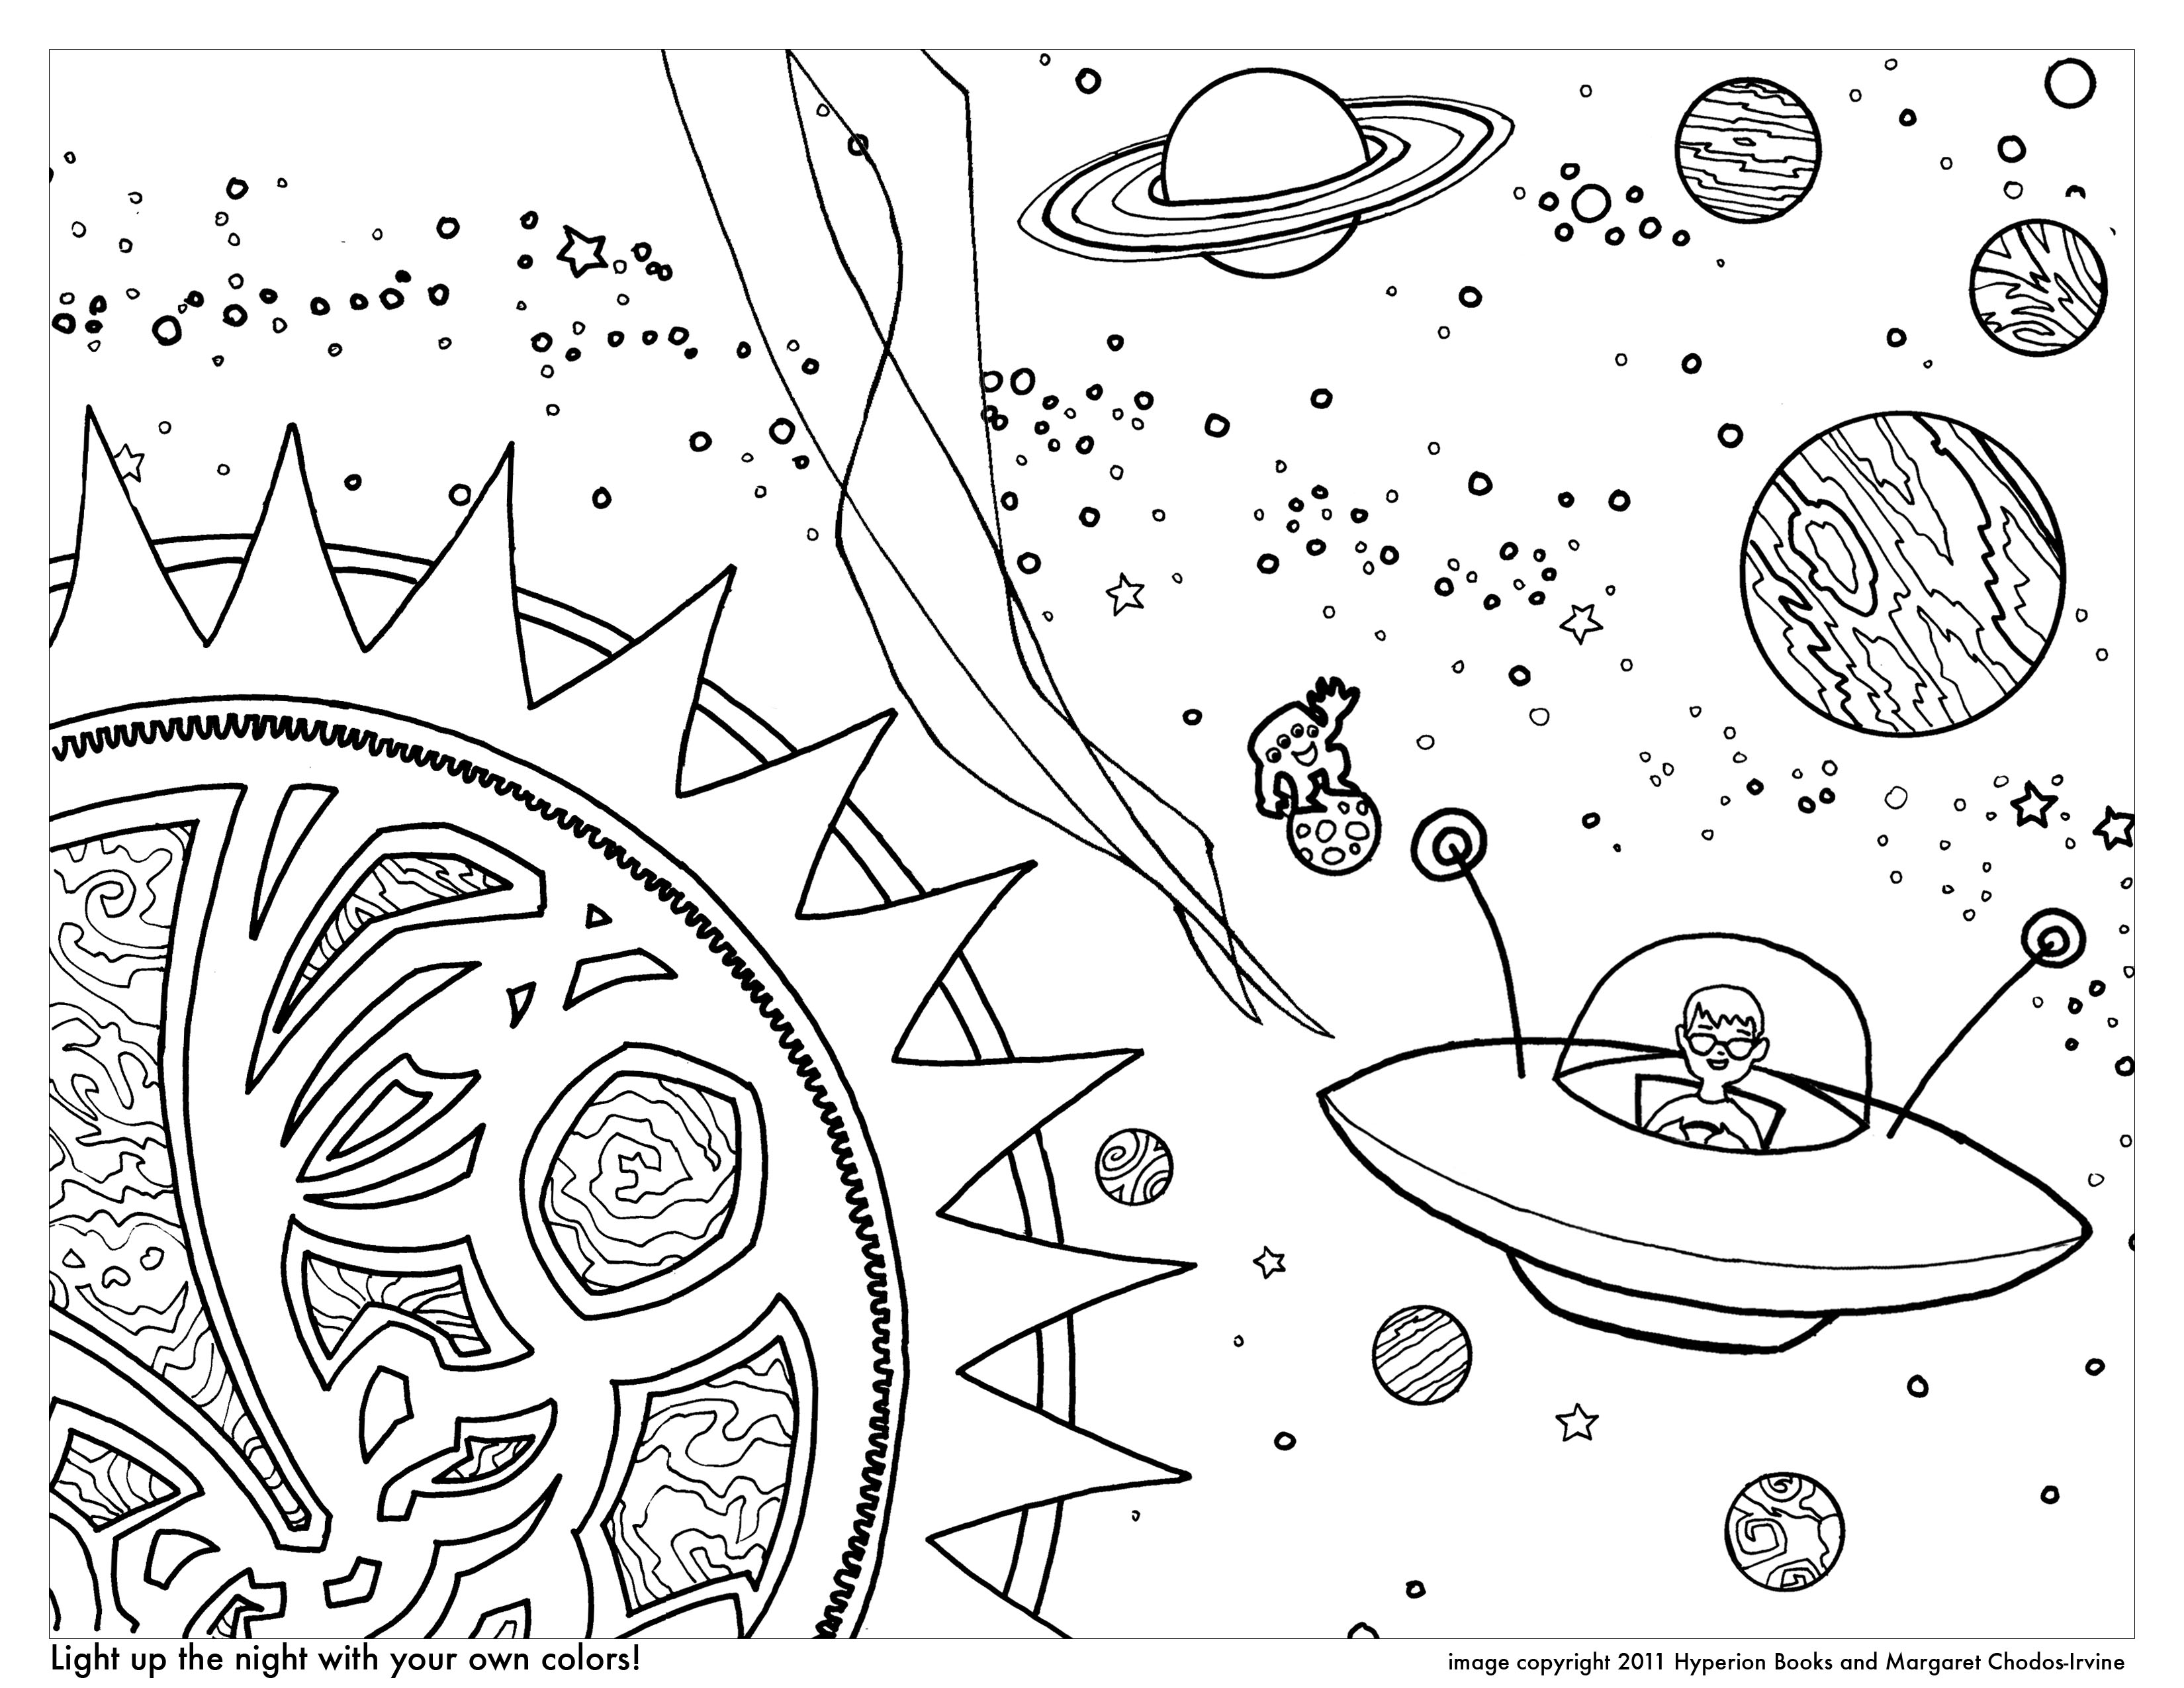 15-best-images-of-science-stars-worksheets-drawing-constellations